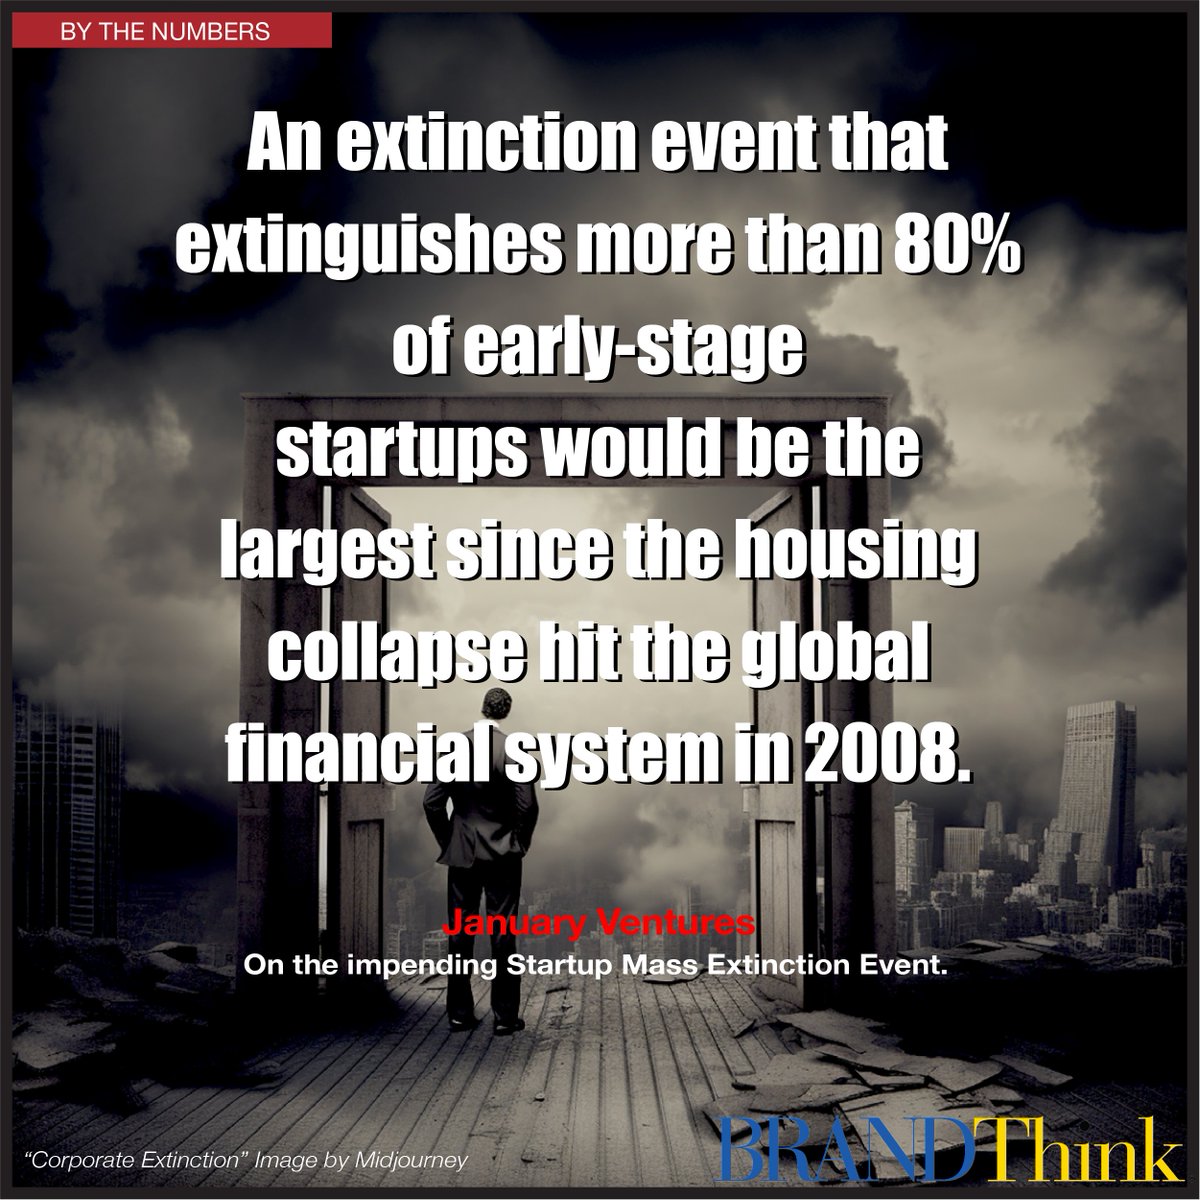 Leading venture capital players are predicting a “mass extinction event” for early- and mid-stage startups that will make the global financial collapse in 2008 “look quaint” by comparison.
#venturecapital #startupfunding #privateequity #innovation #leadership